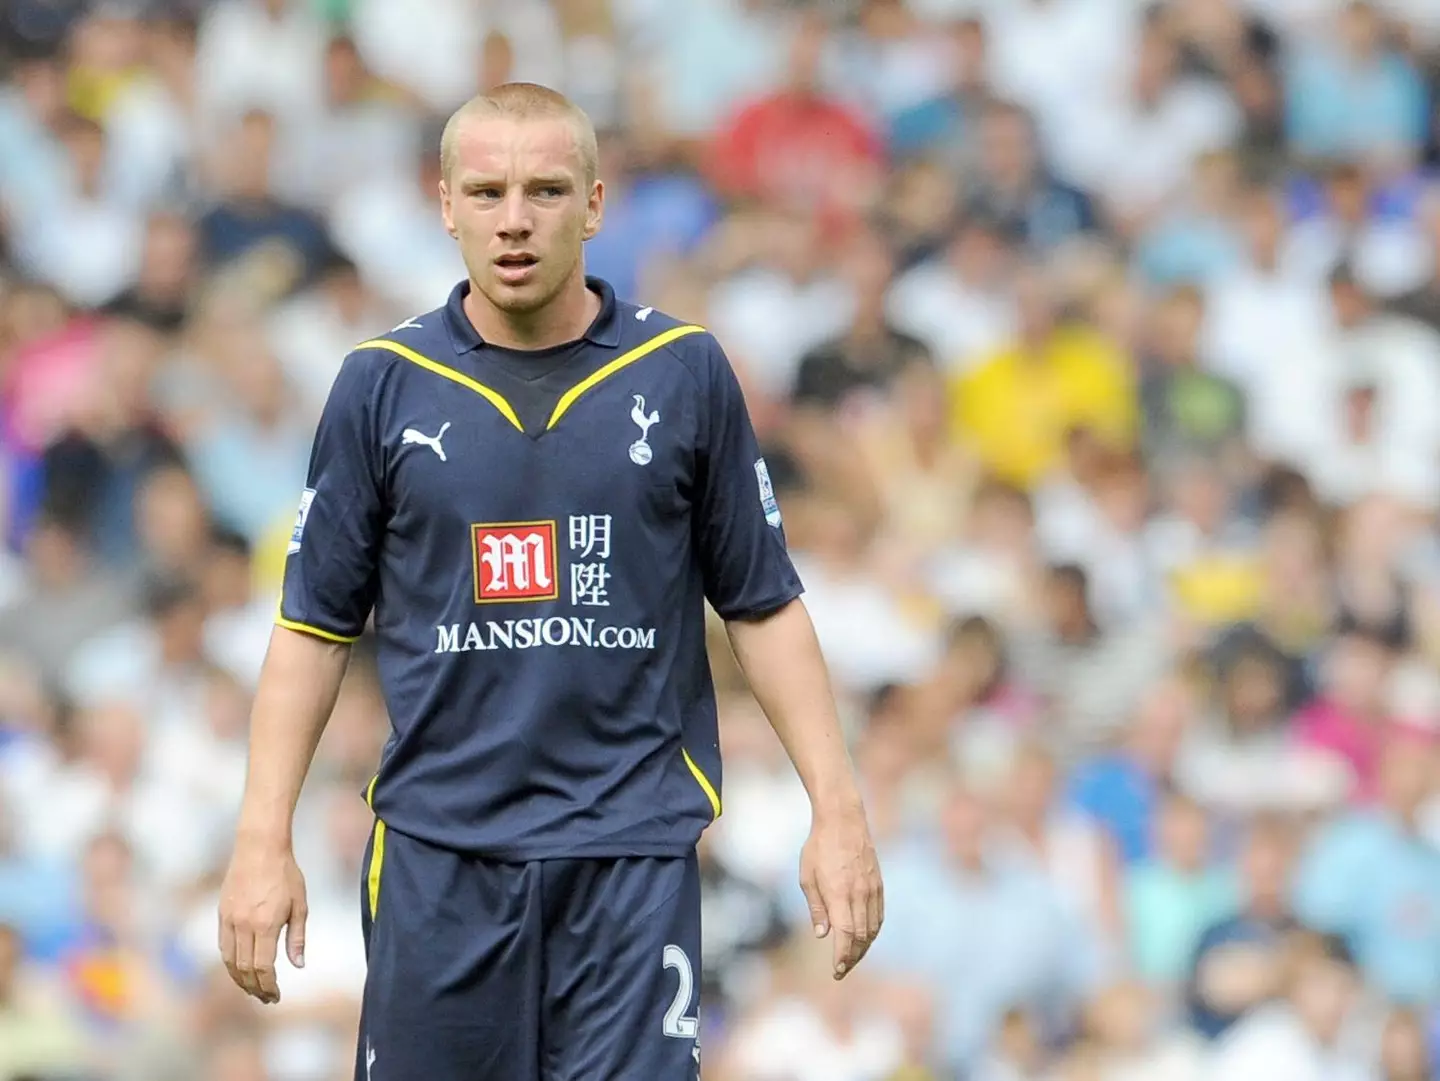 Former Tottenham midfielder Jamie O'Hara will also fight in the event (Image: Alamy)